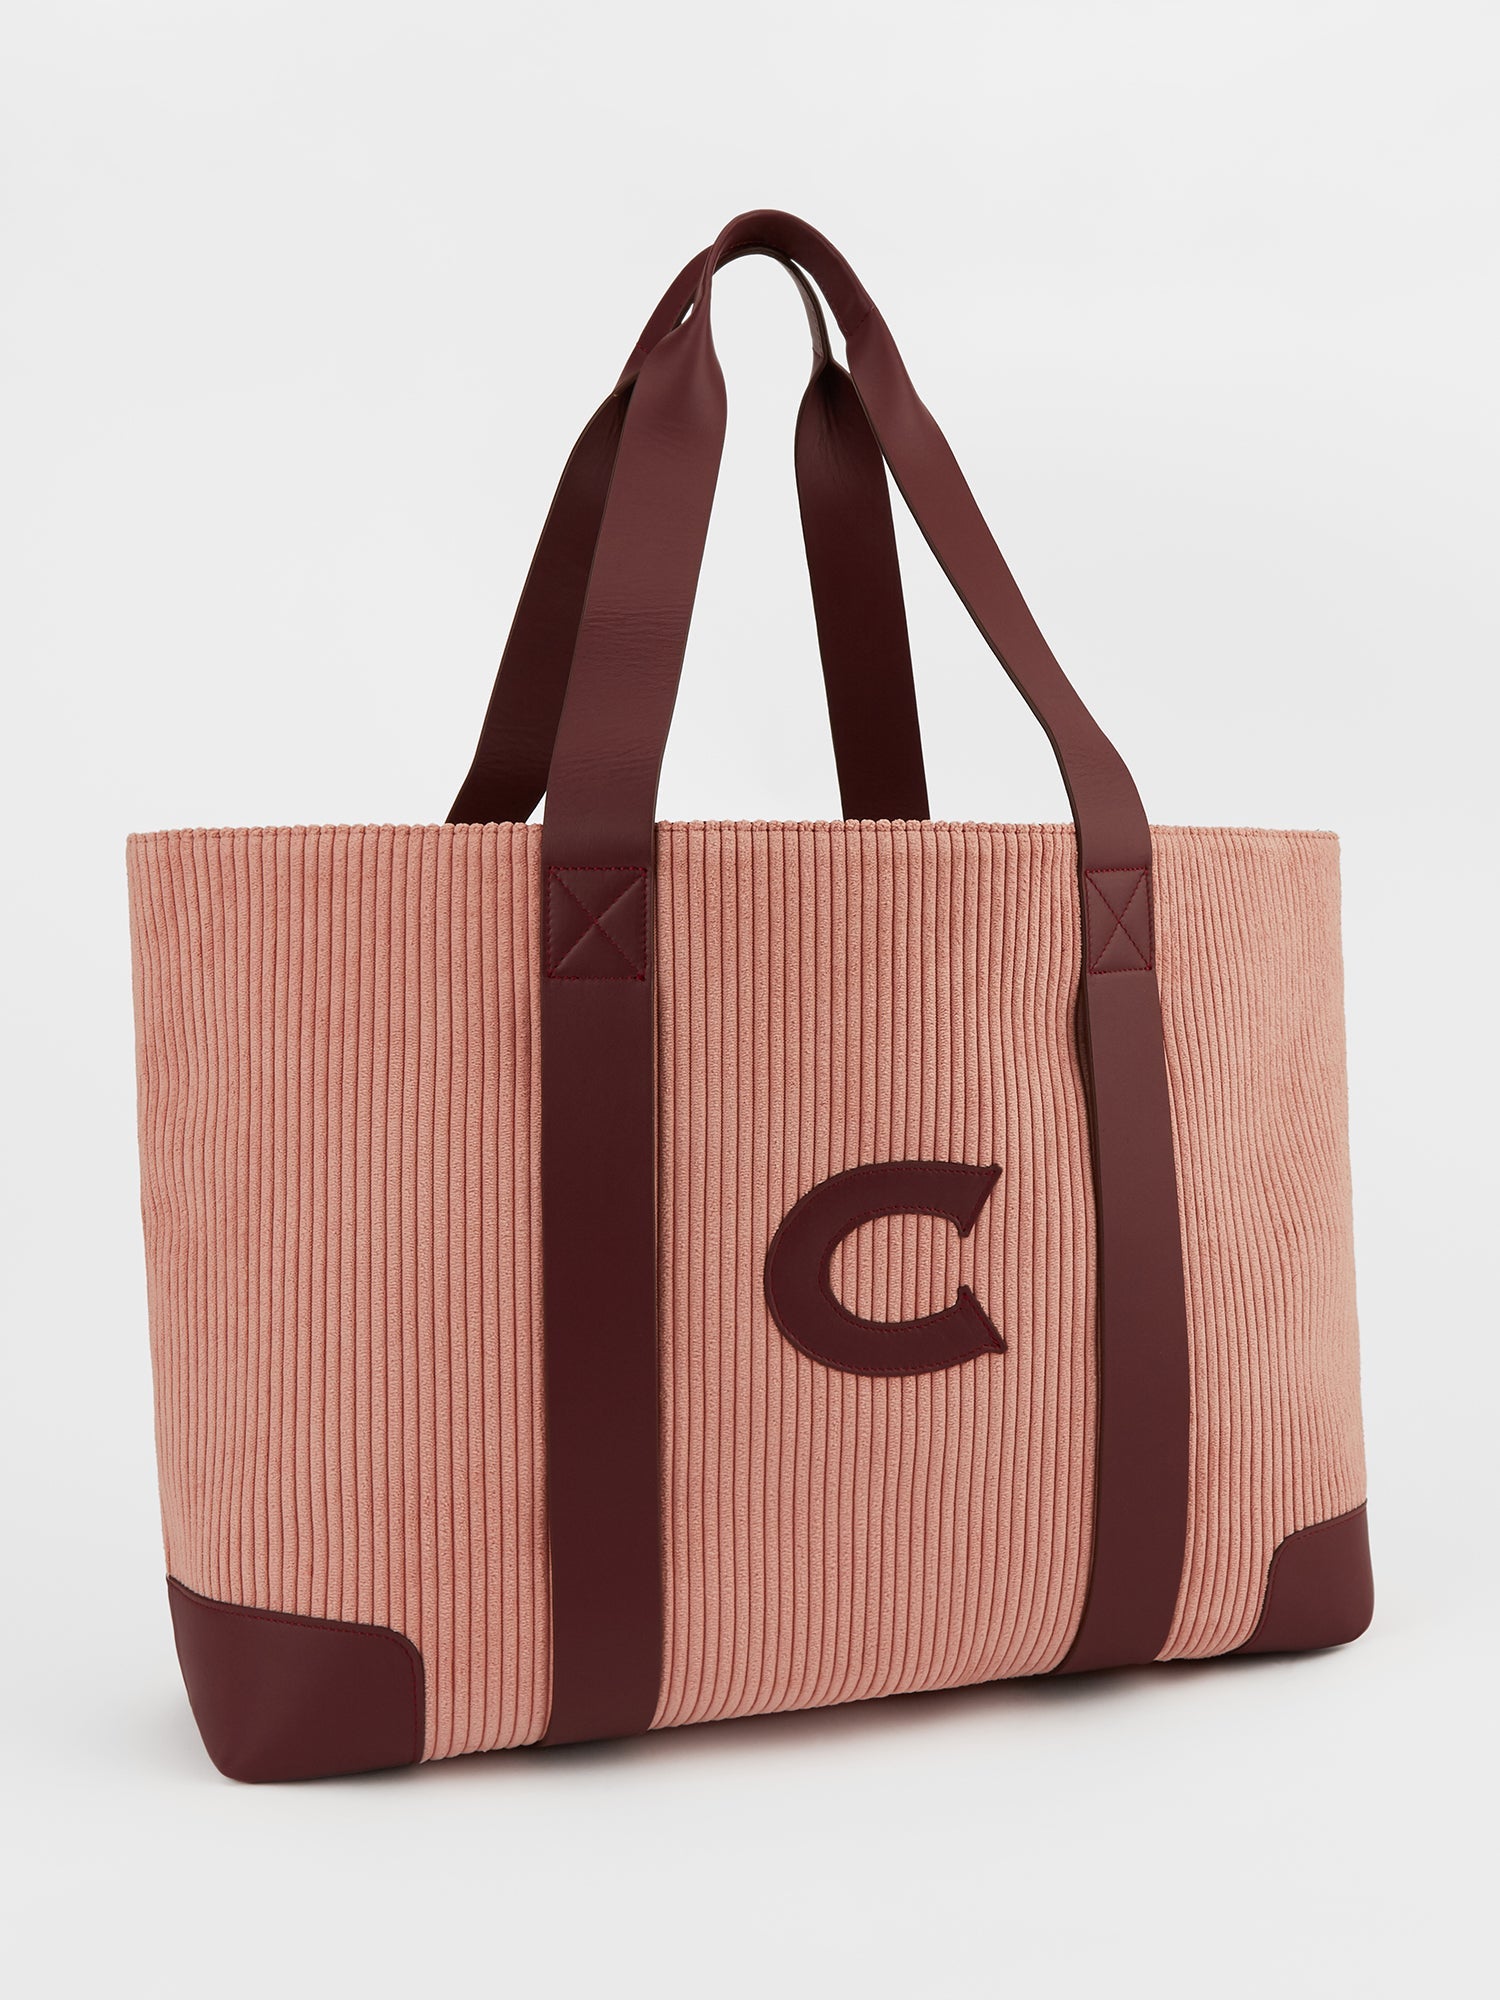 'Letter C' The Oversized Corduroy Tote Bag, Dusty Pink & Claret